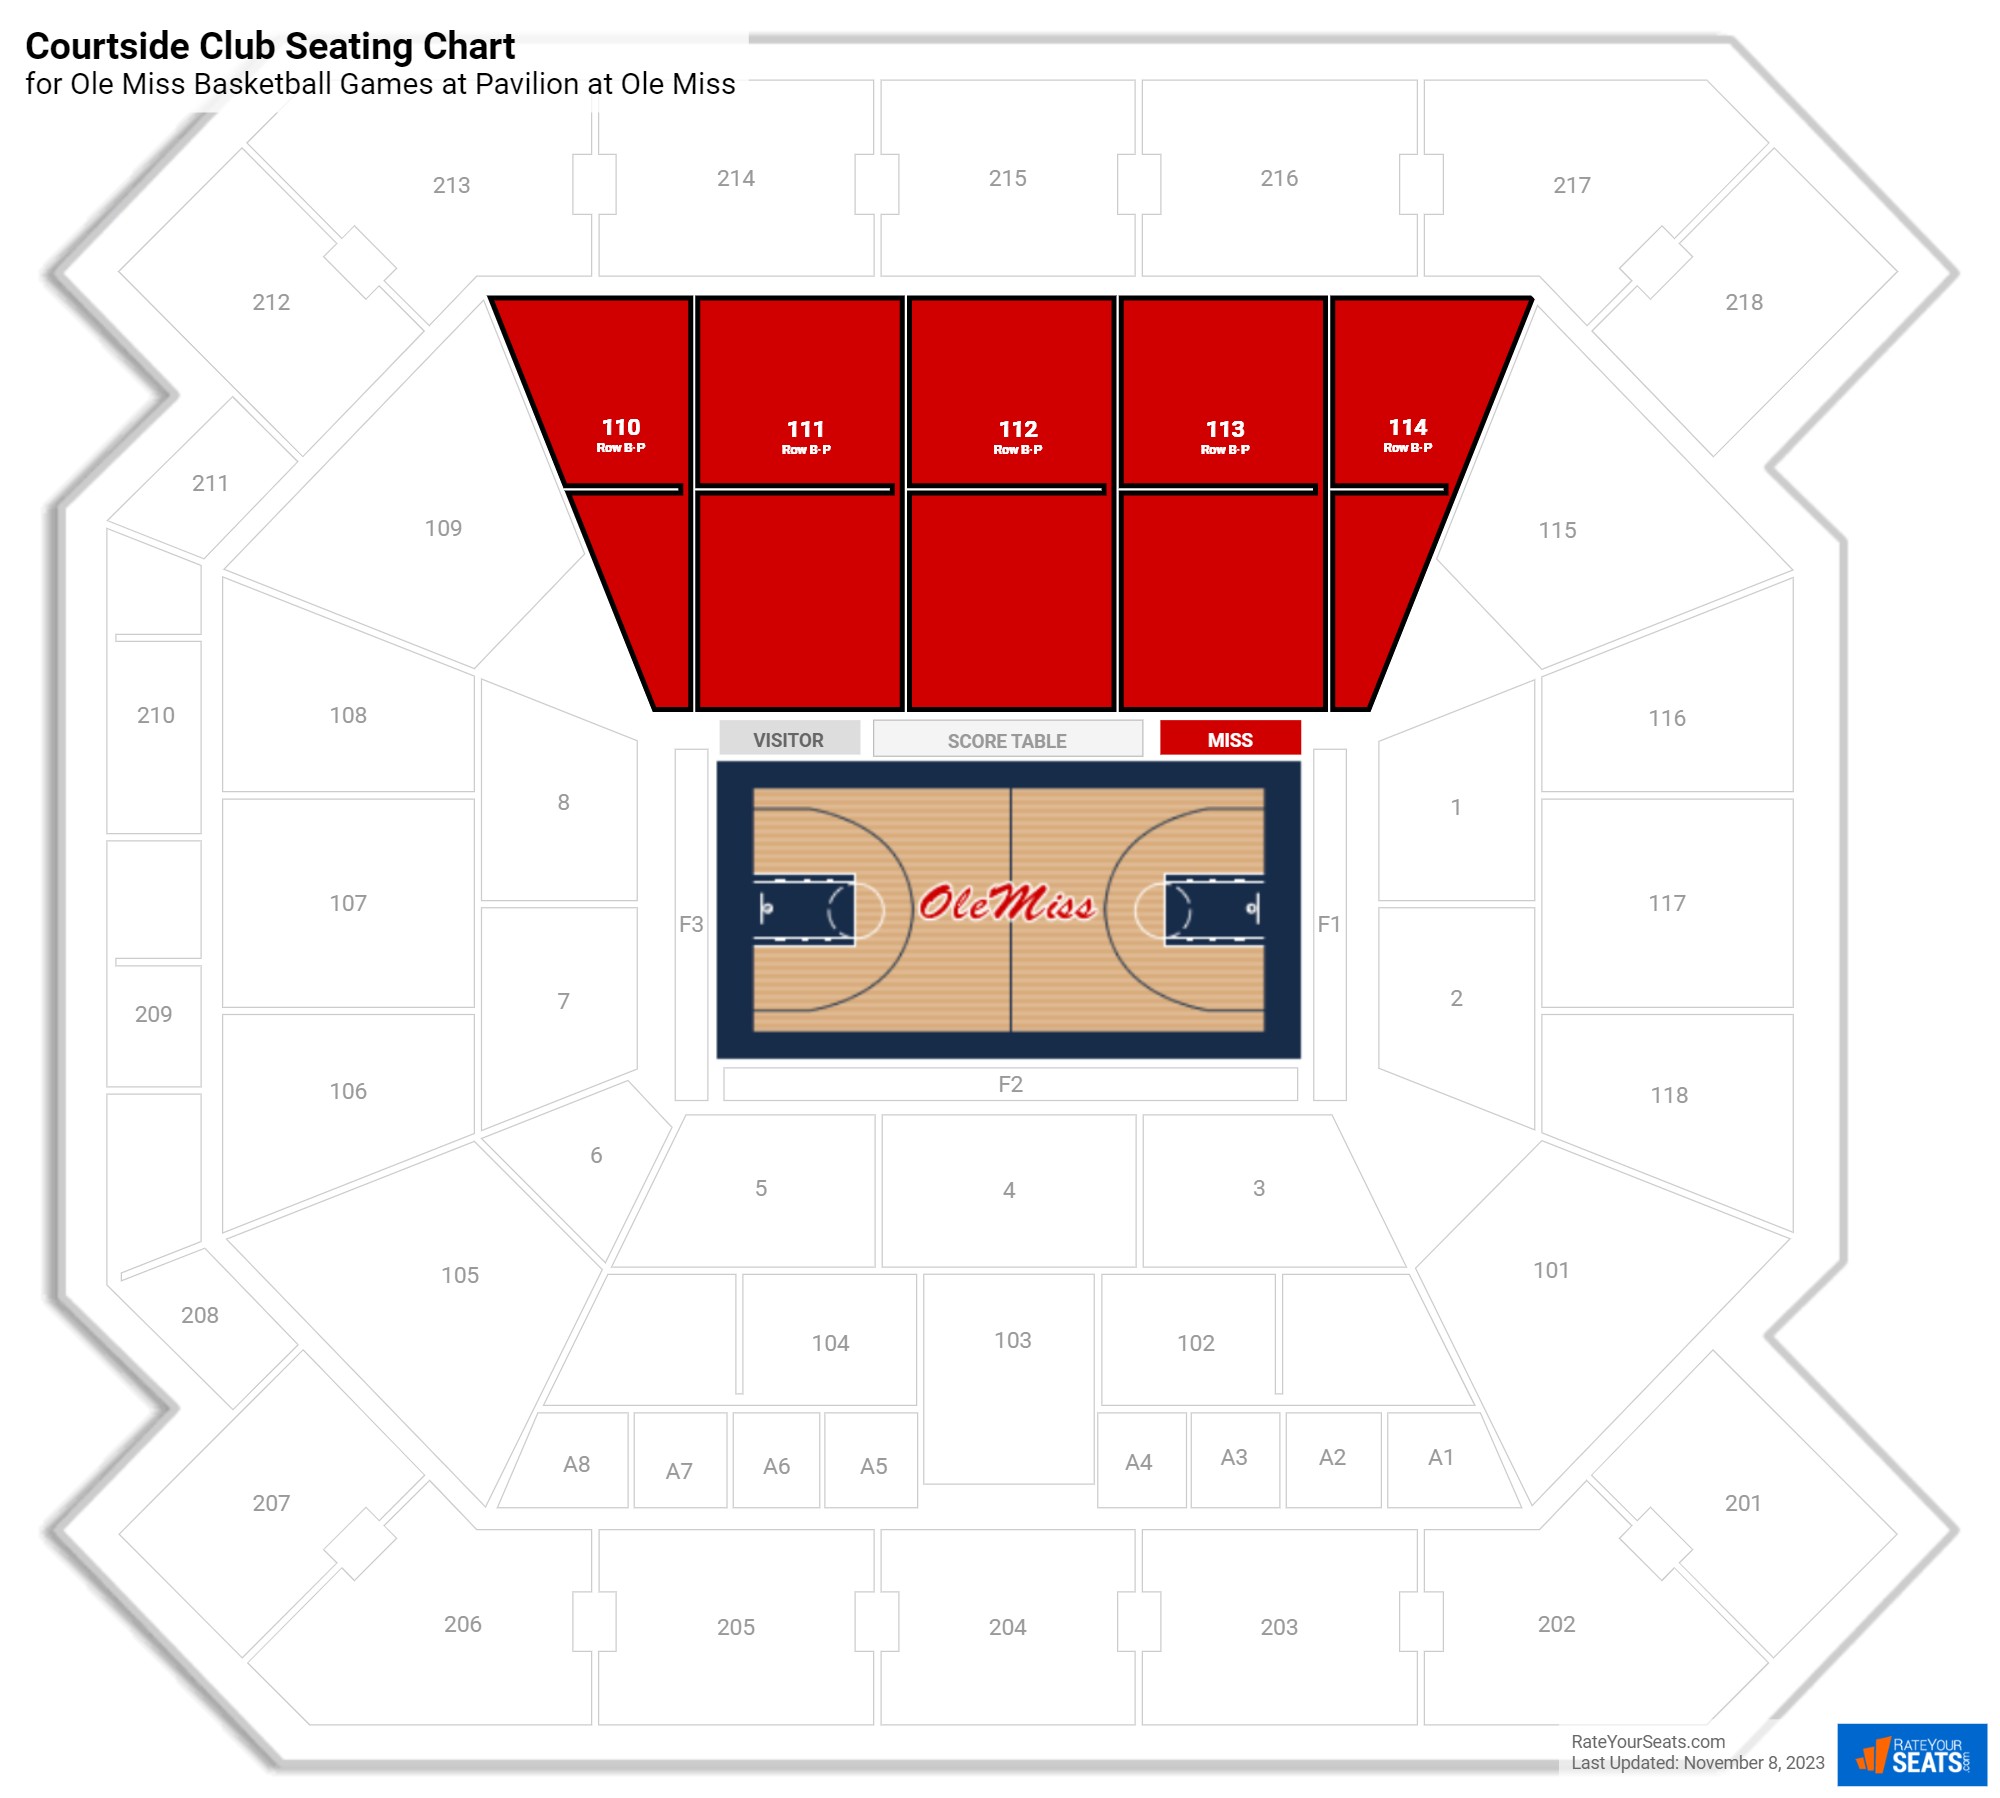 Ole Miss Courtside Club Seating Chart at Pavilion at Ole Miss